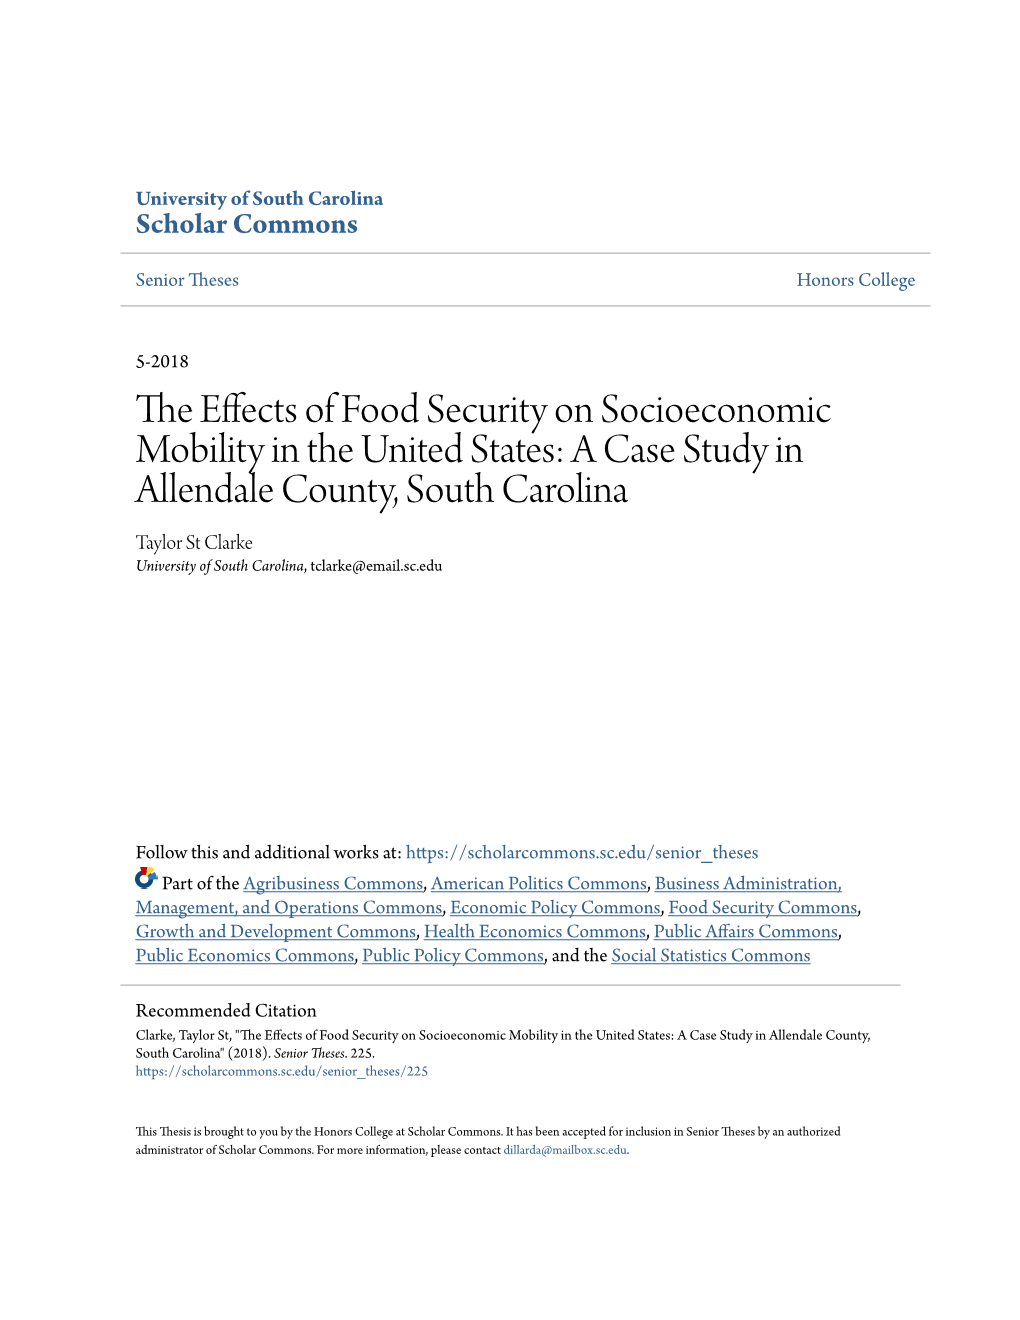 The Effects of Food Security on Socioeconomic Mobility in the United States: a Case Study in Allendale County, South Carolina" (2018)